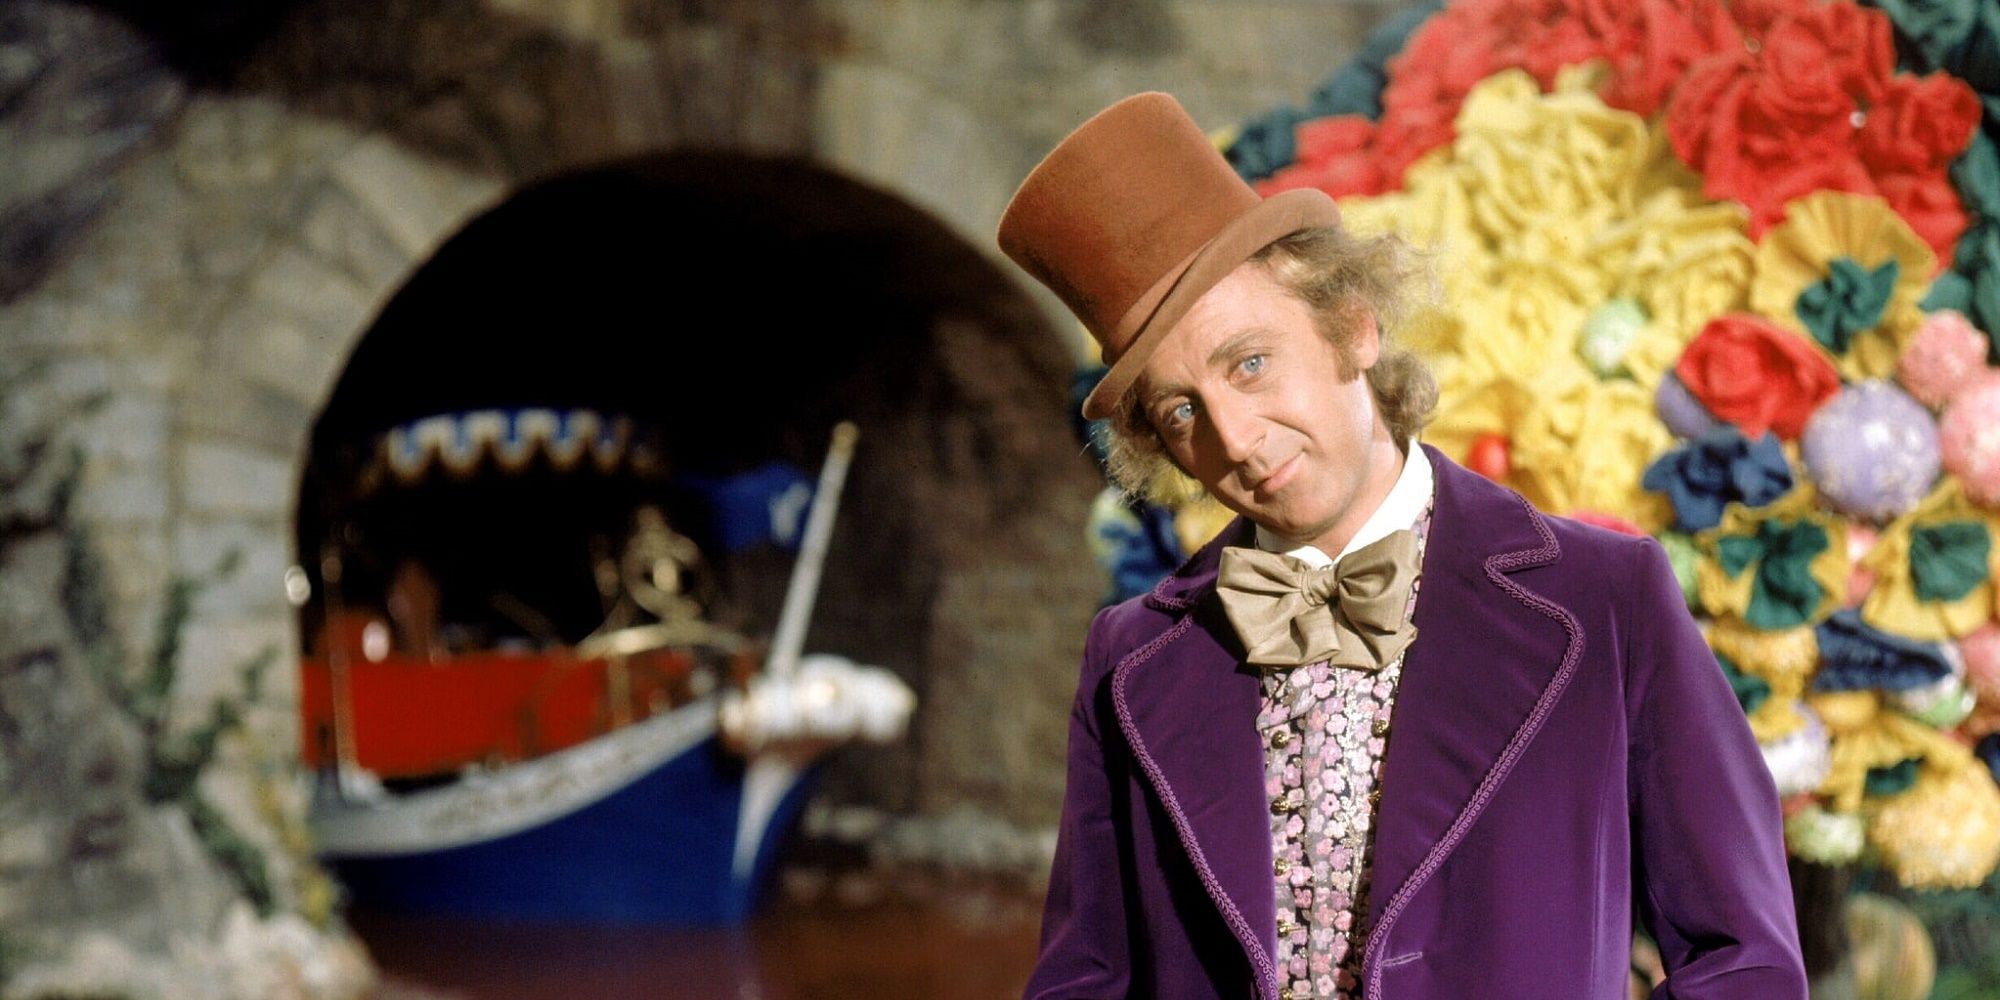 Blazing Saddles &amp; Willy Wonka to Get Theatrical Rerelease in Memory of Gene Wilder